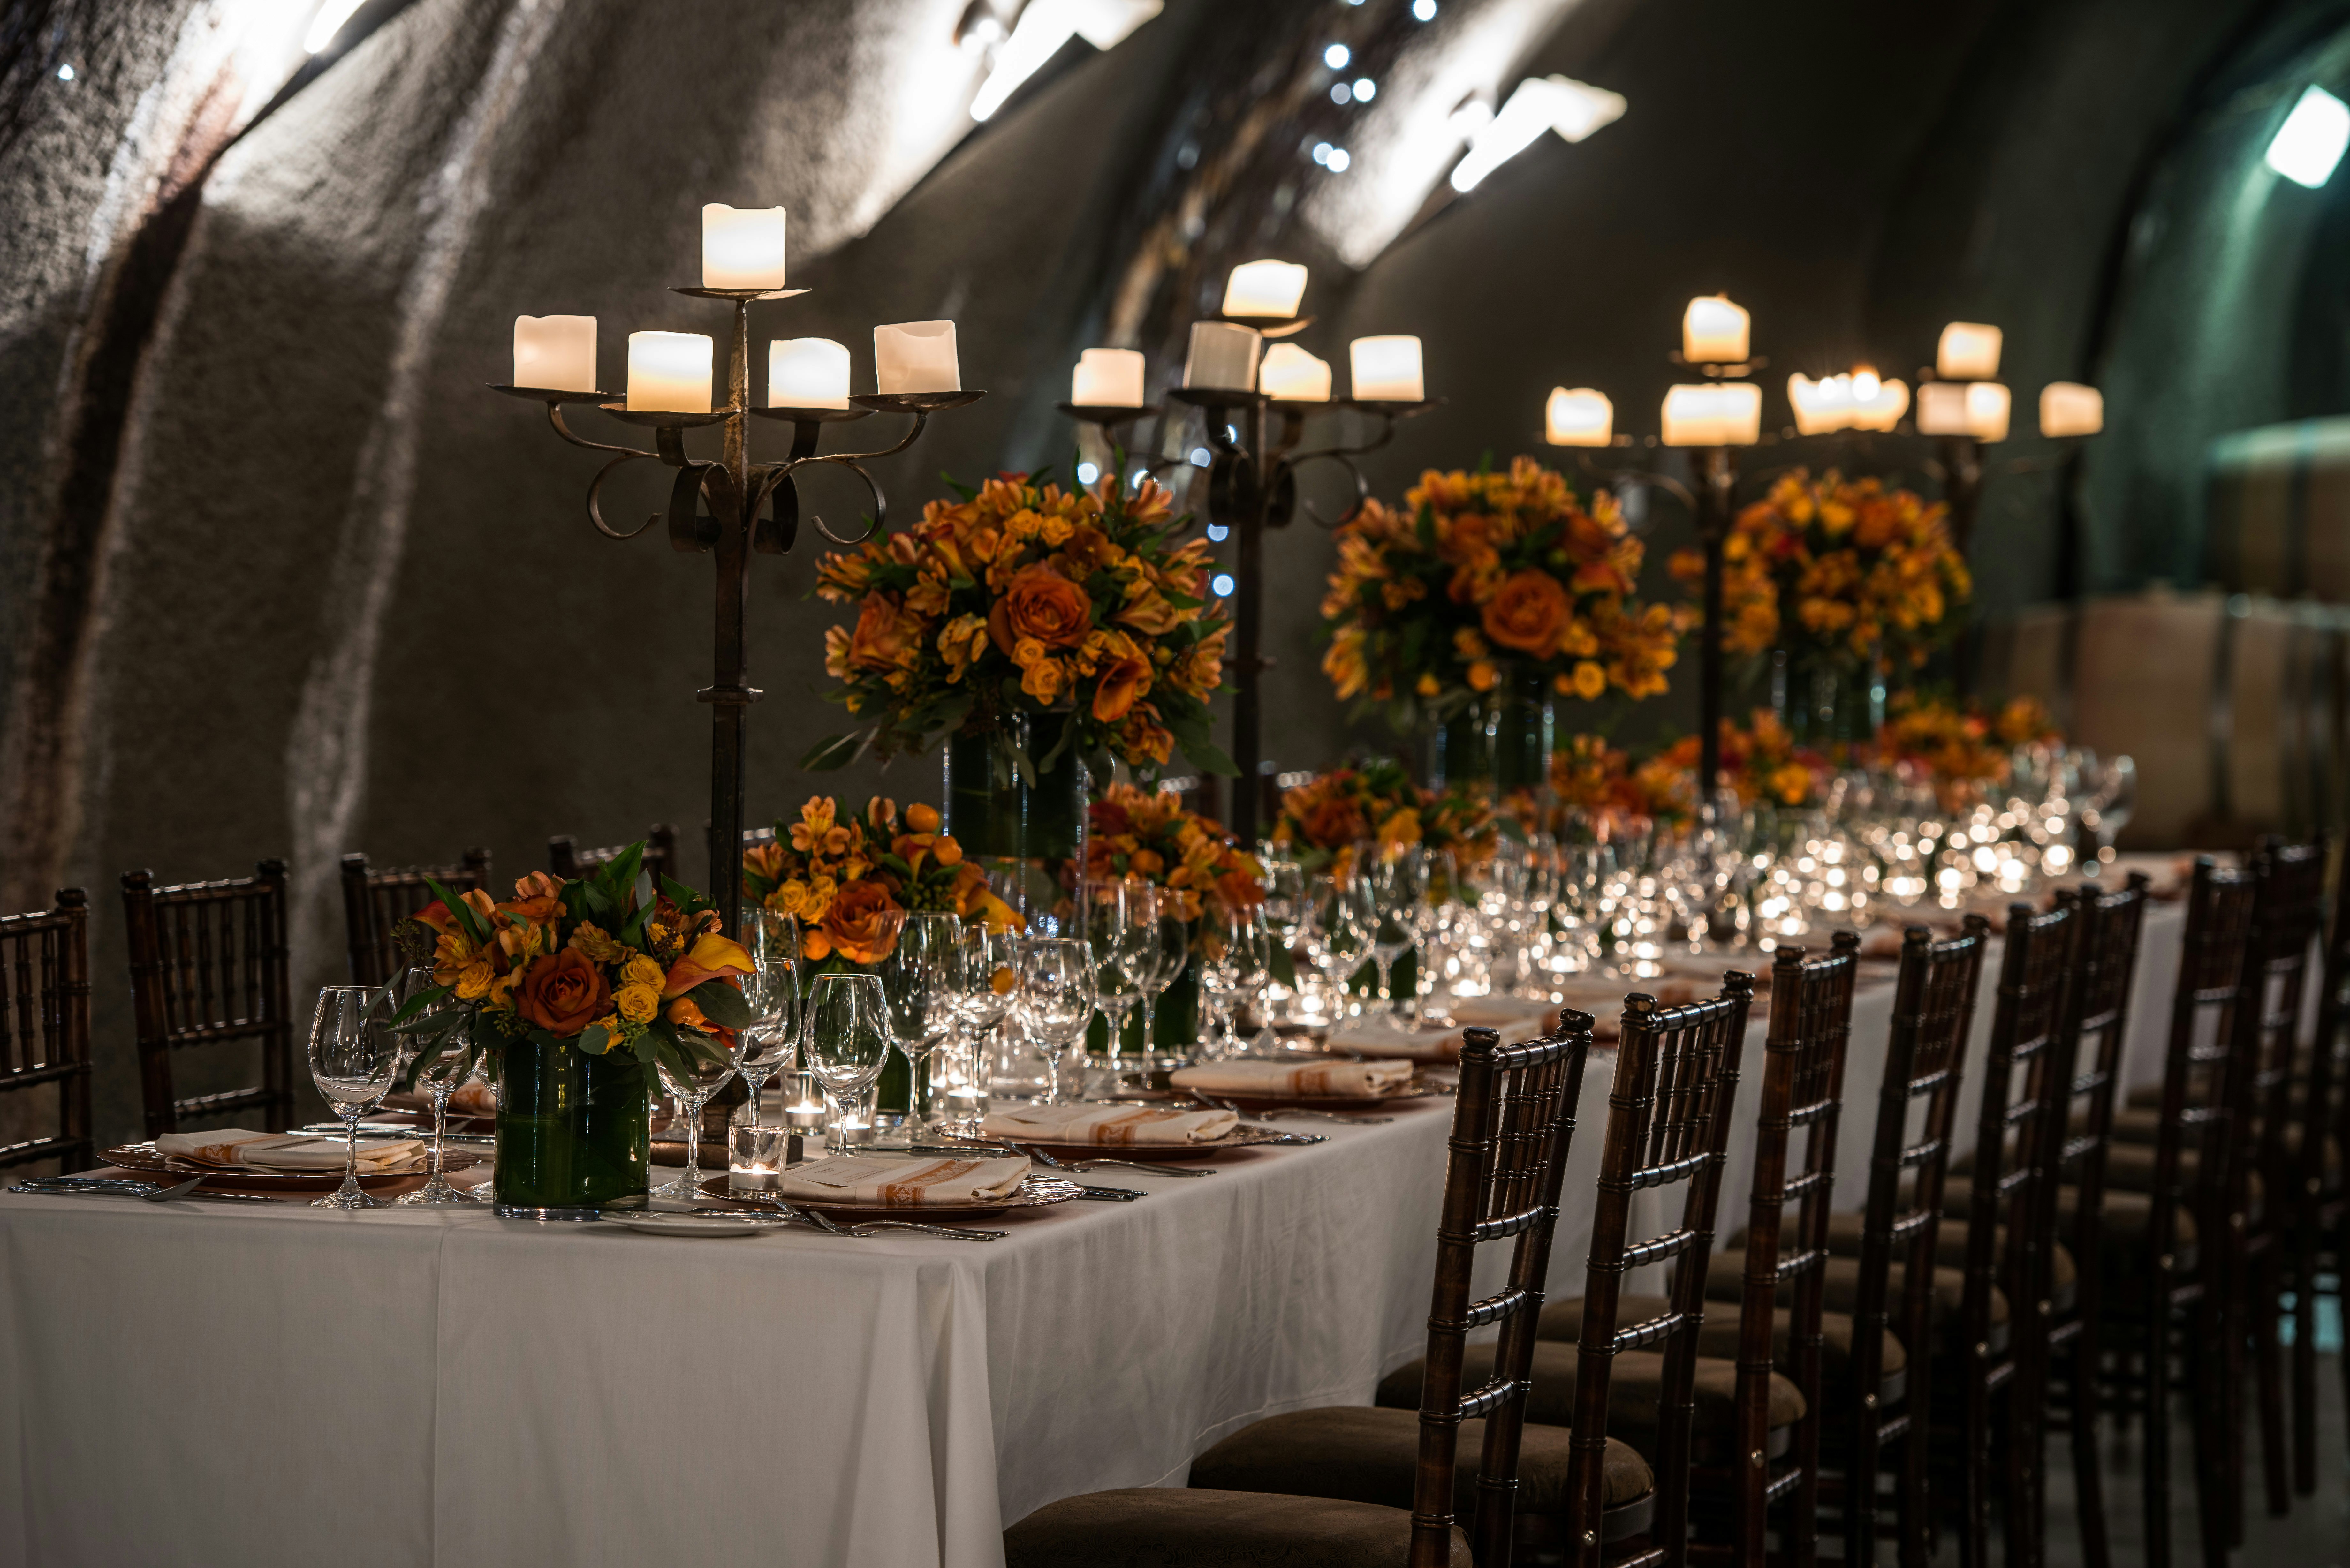 A long table set with candelabra an orange flowers is prepared for an elegant meal 